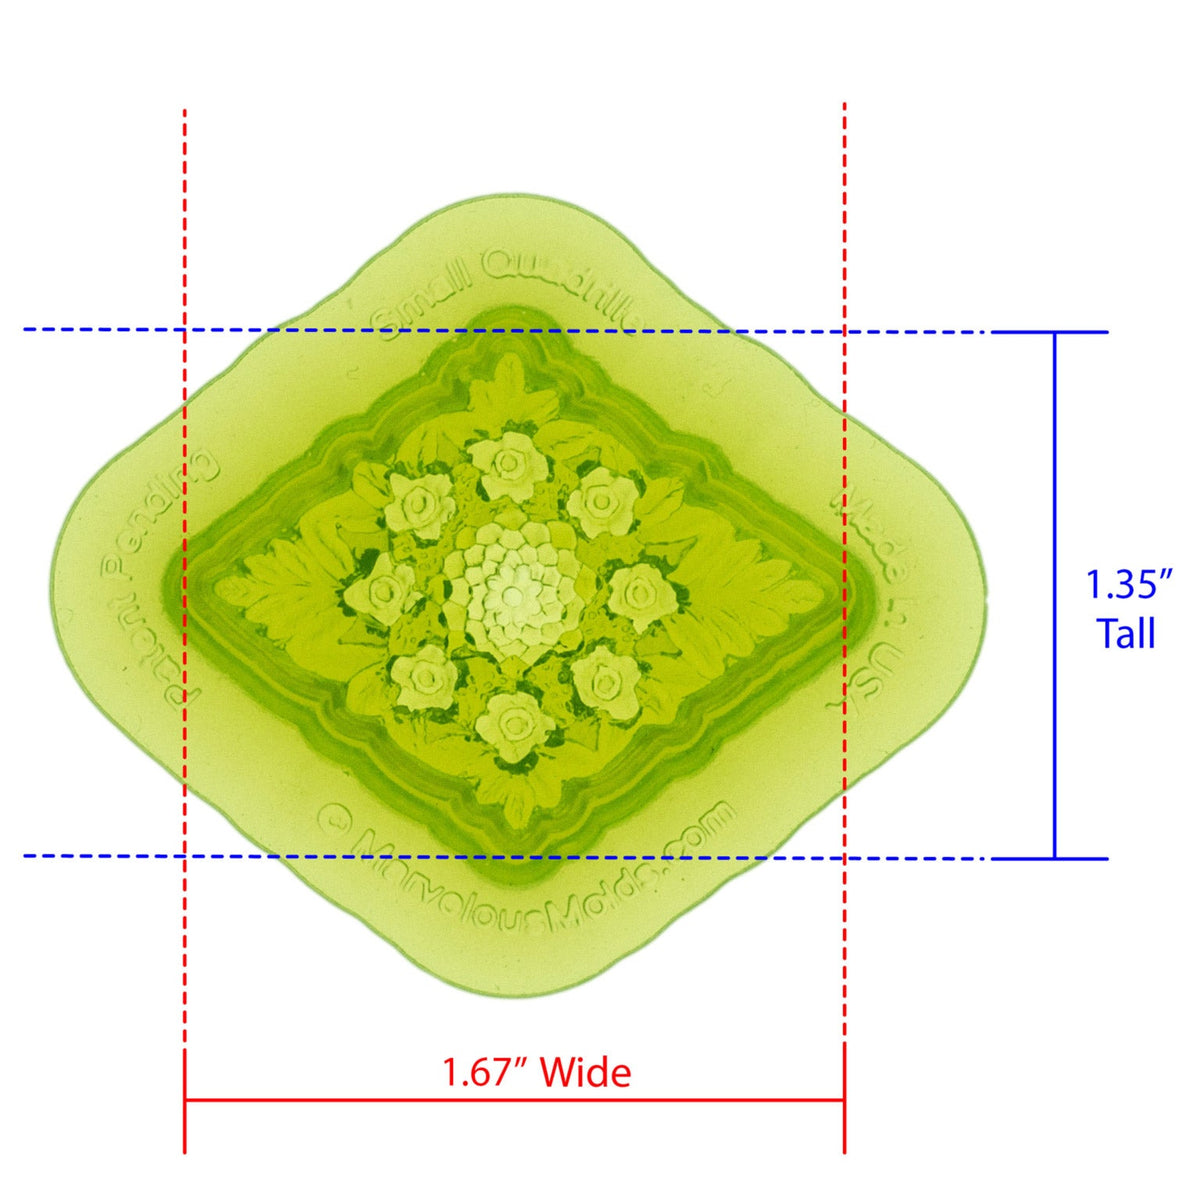 Small Quadrille Medallion Silicone Mold Cavity measures 1.67 inches Wide by 1.35 inches Tall, proudly Made in USA